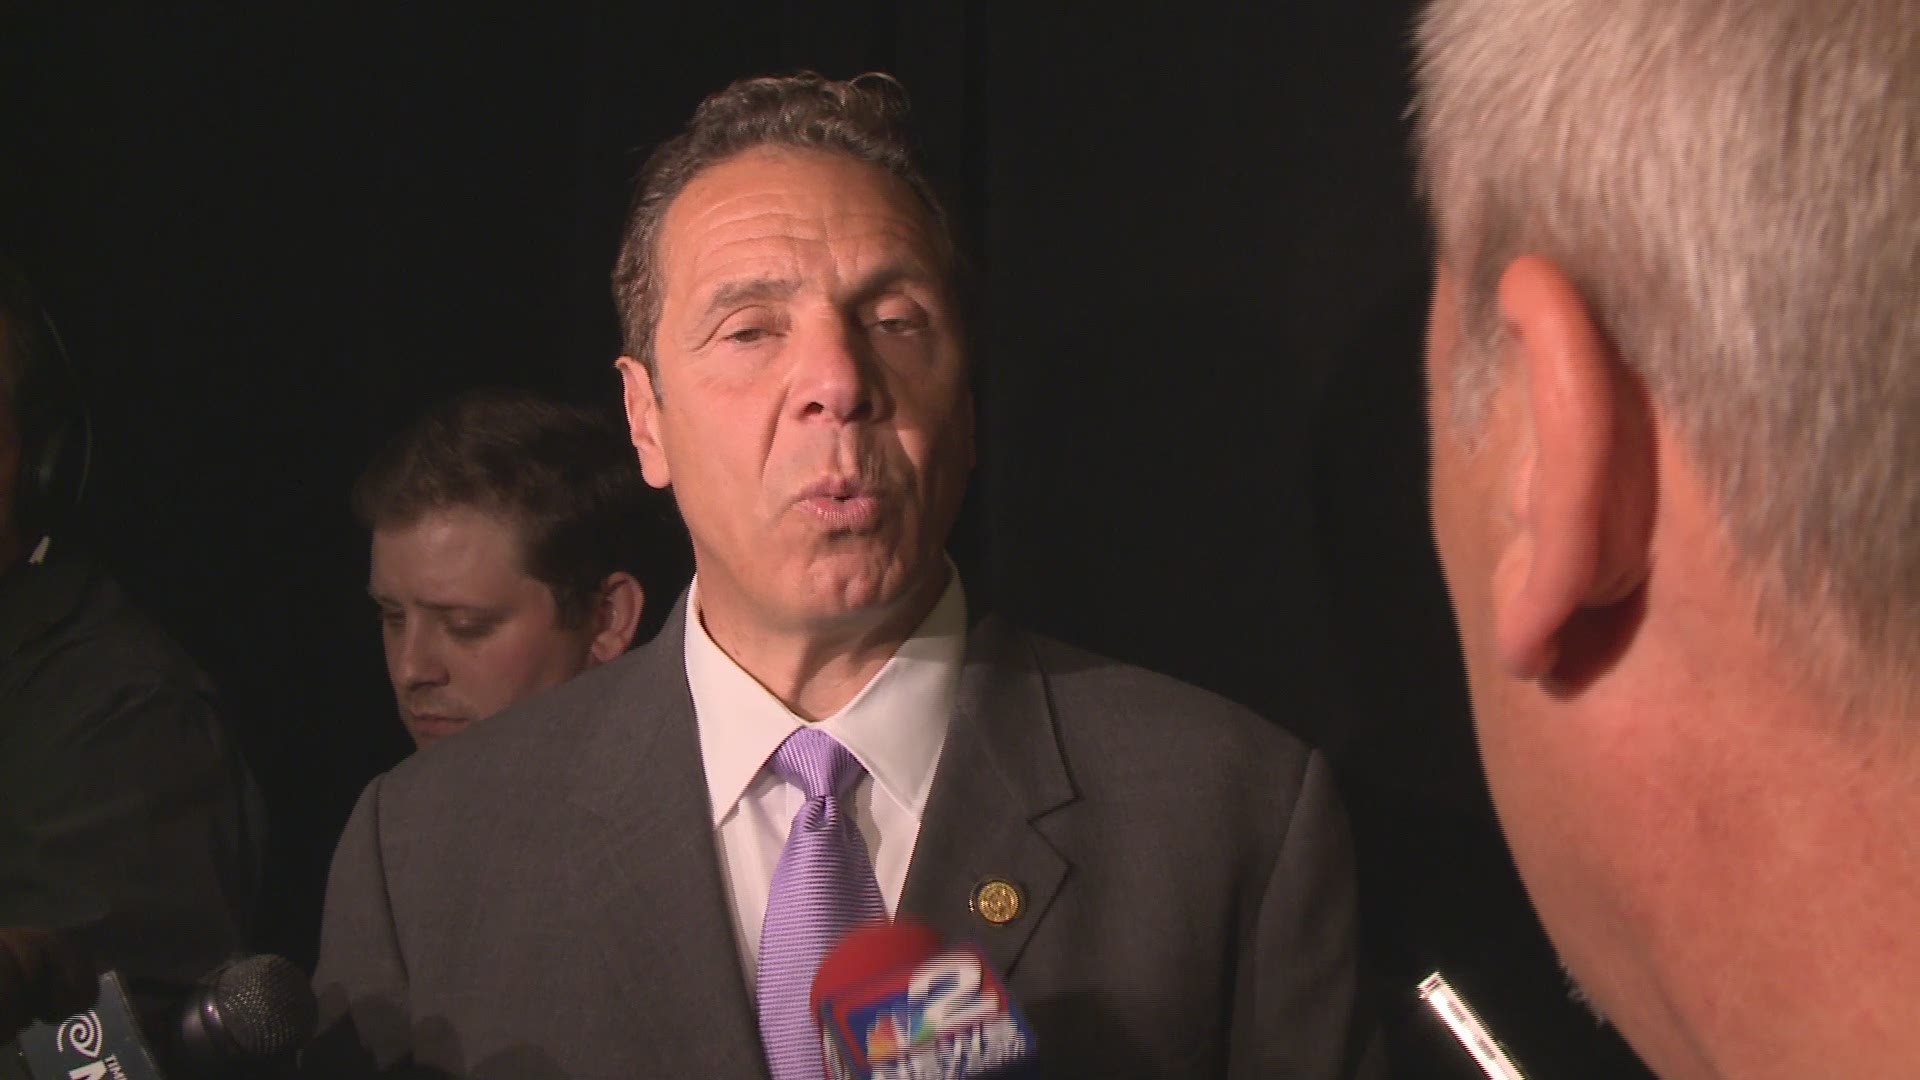 Cuomo talks about the push for ethics reform in Albany